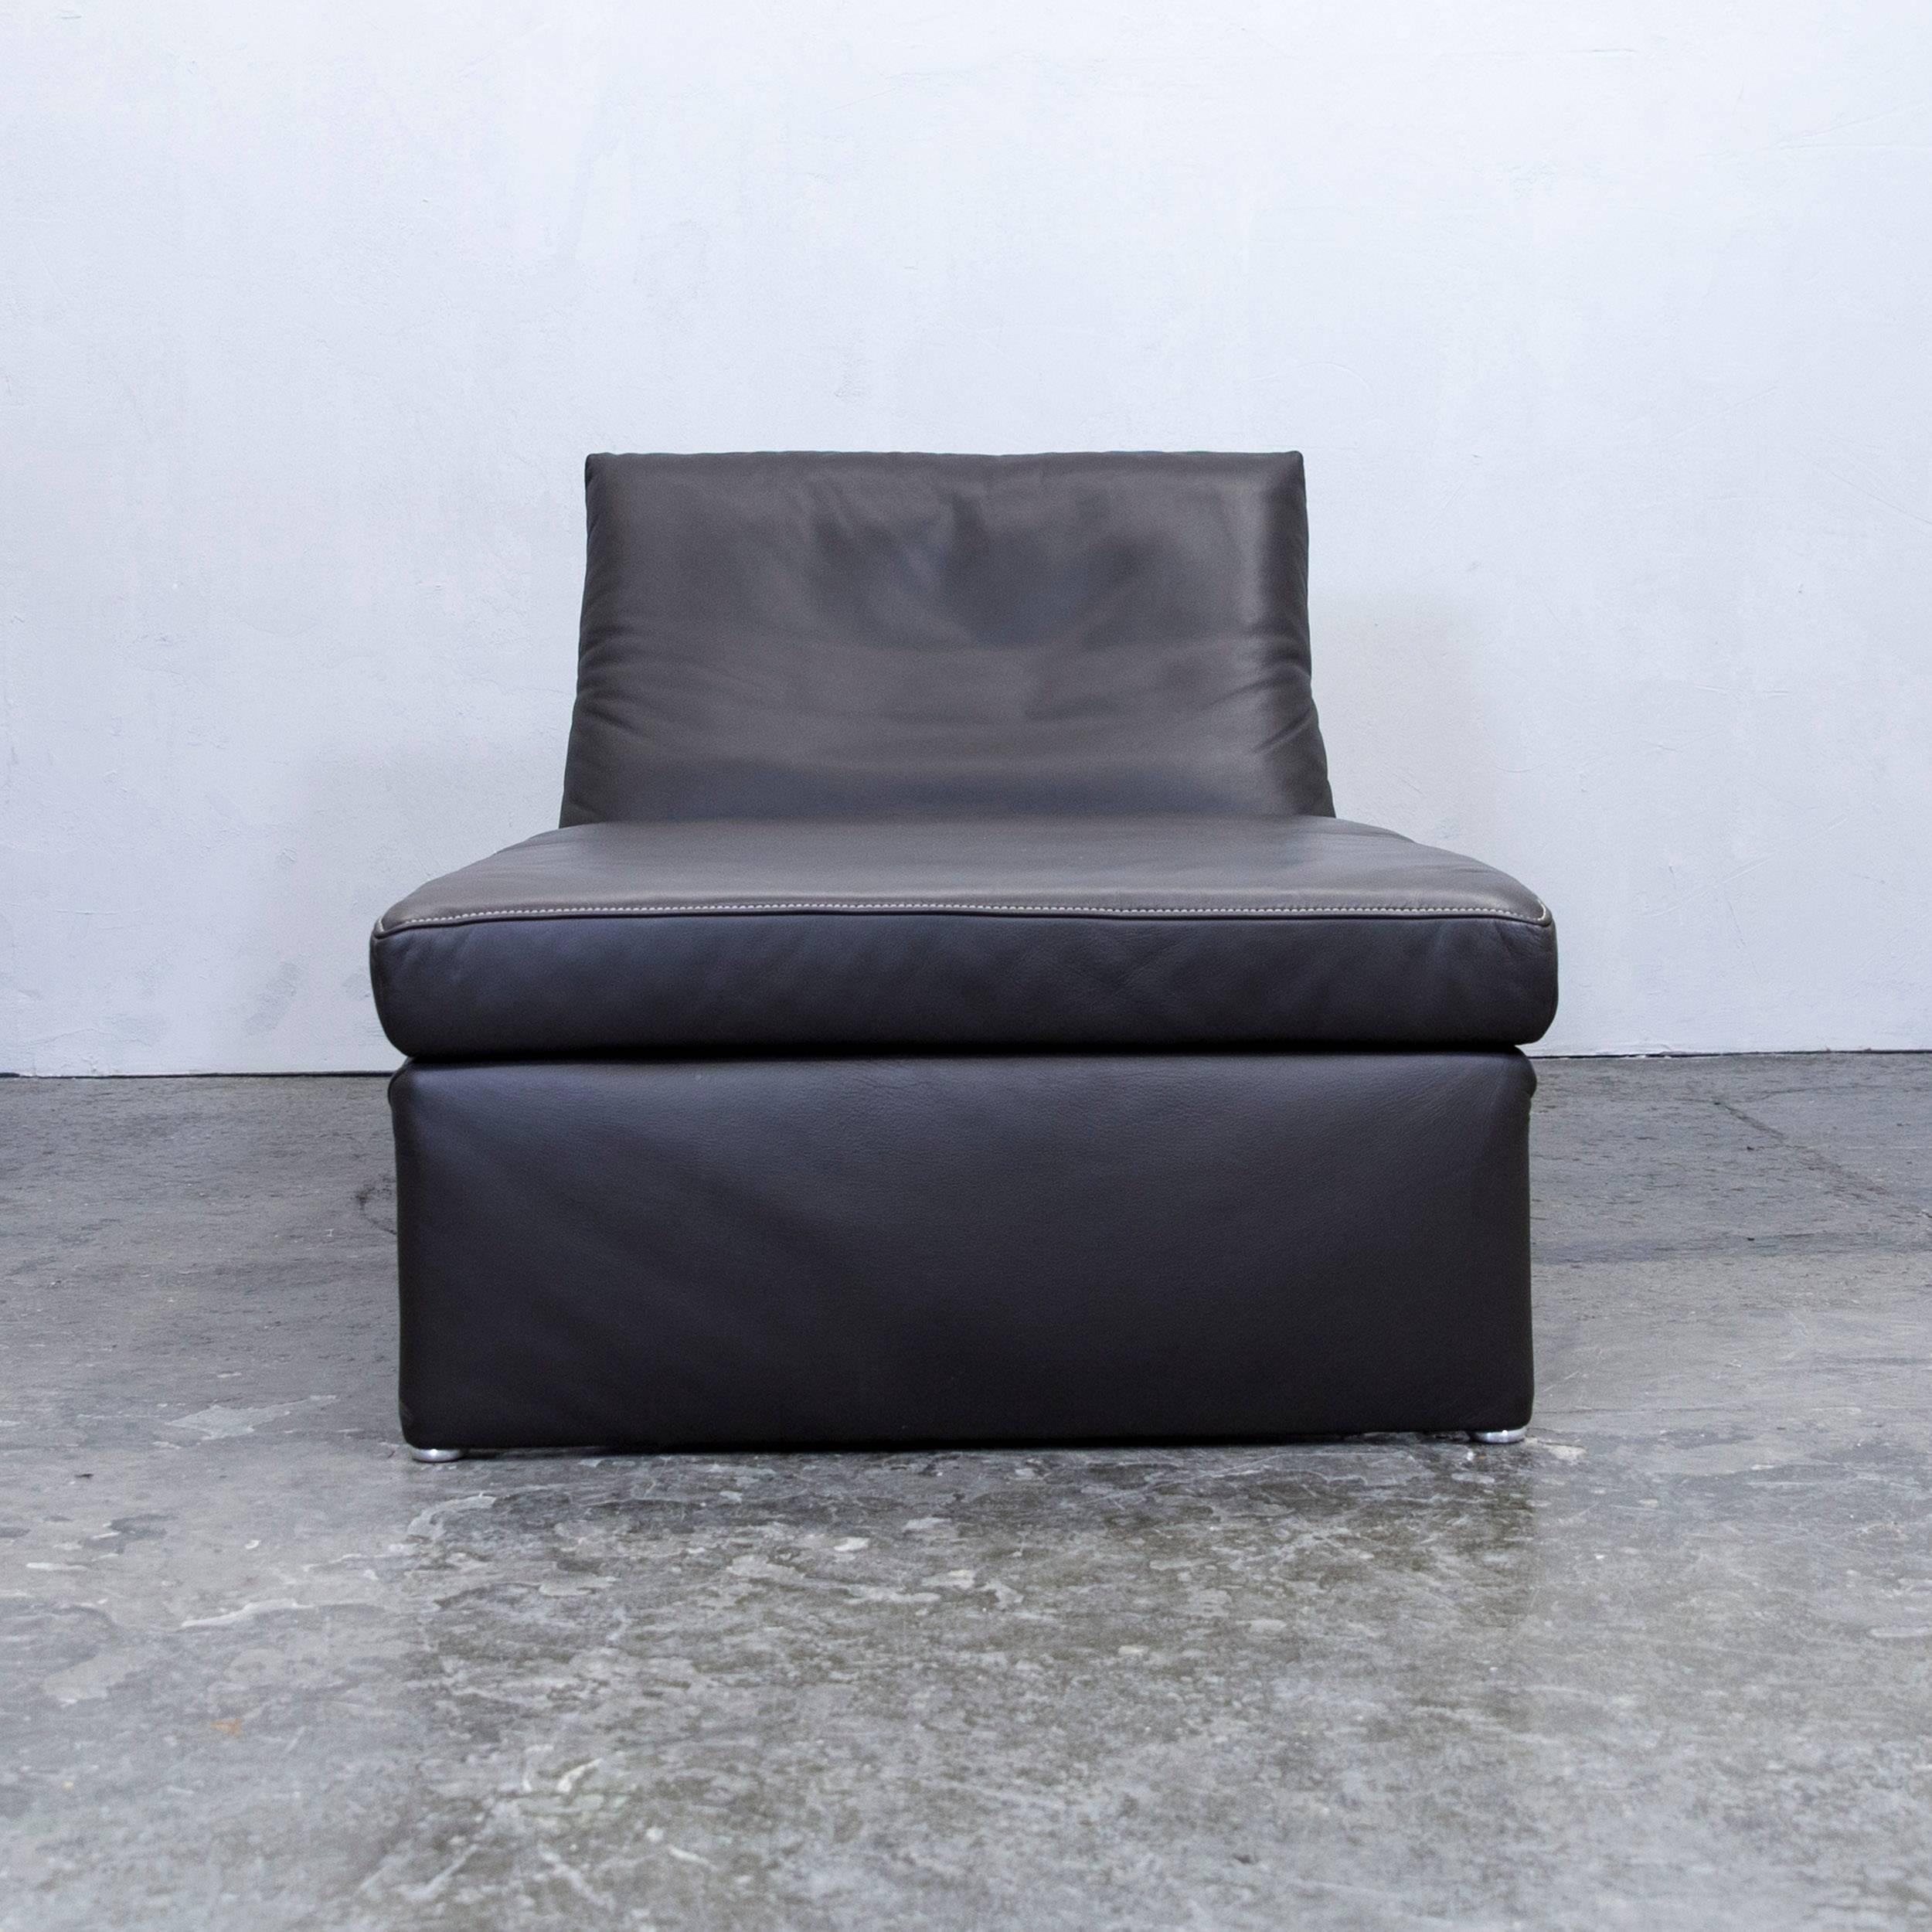 Koinor Designer Chaiselongue Leather Mocca Brown Recamiere Function Modern In Excellent Condition For Sale In Cologne, DE